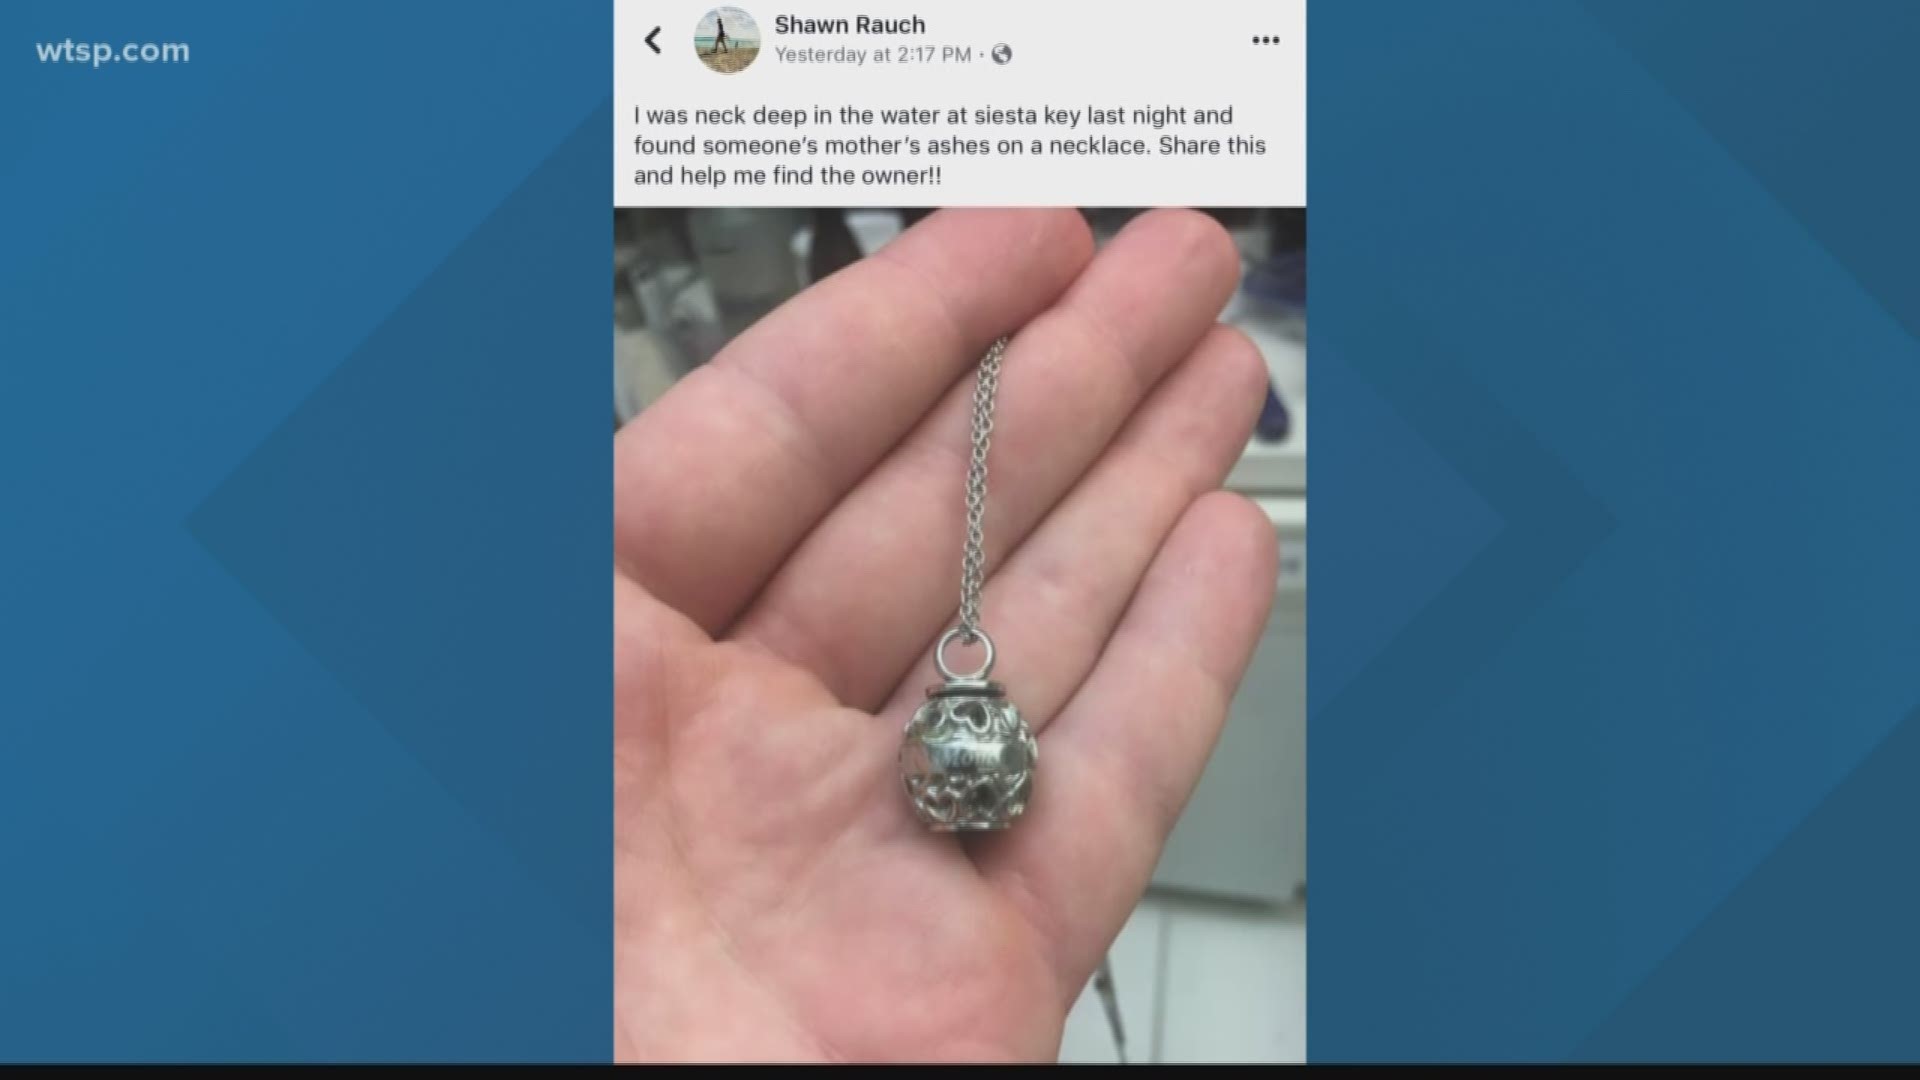 Shawn Rauch is hoping to find the rightful owner of the necklace.